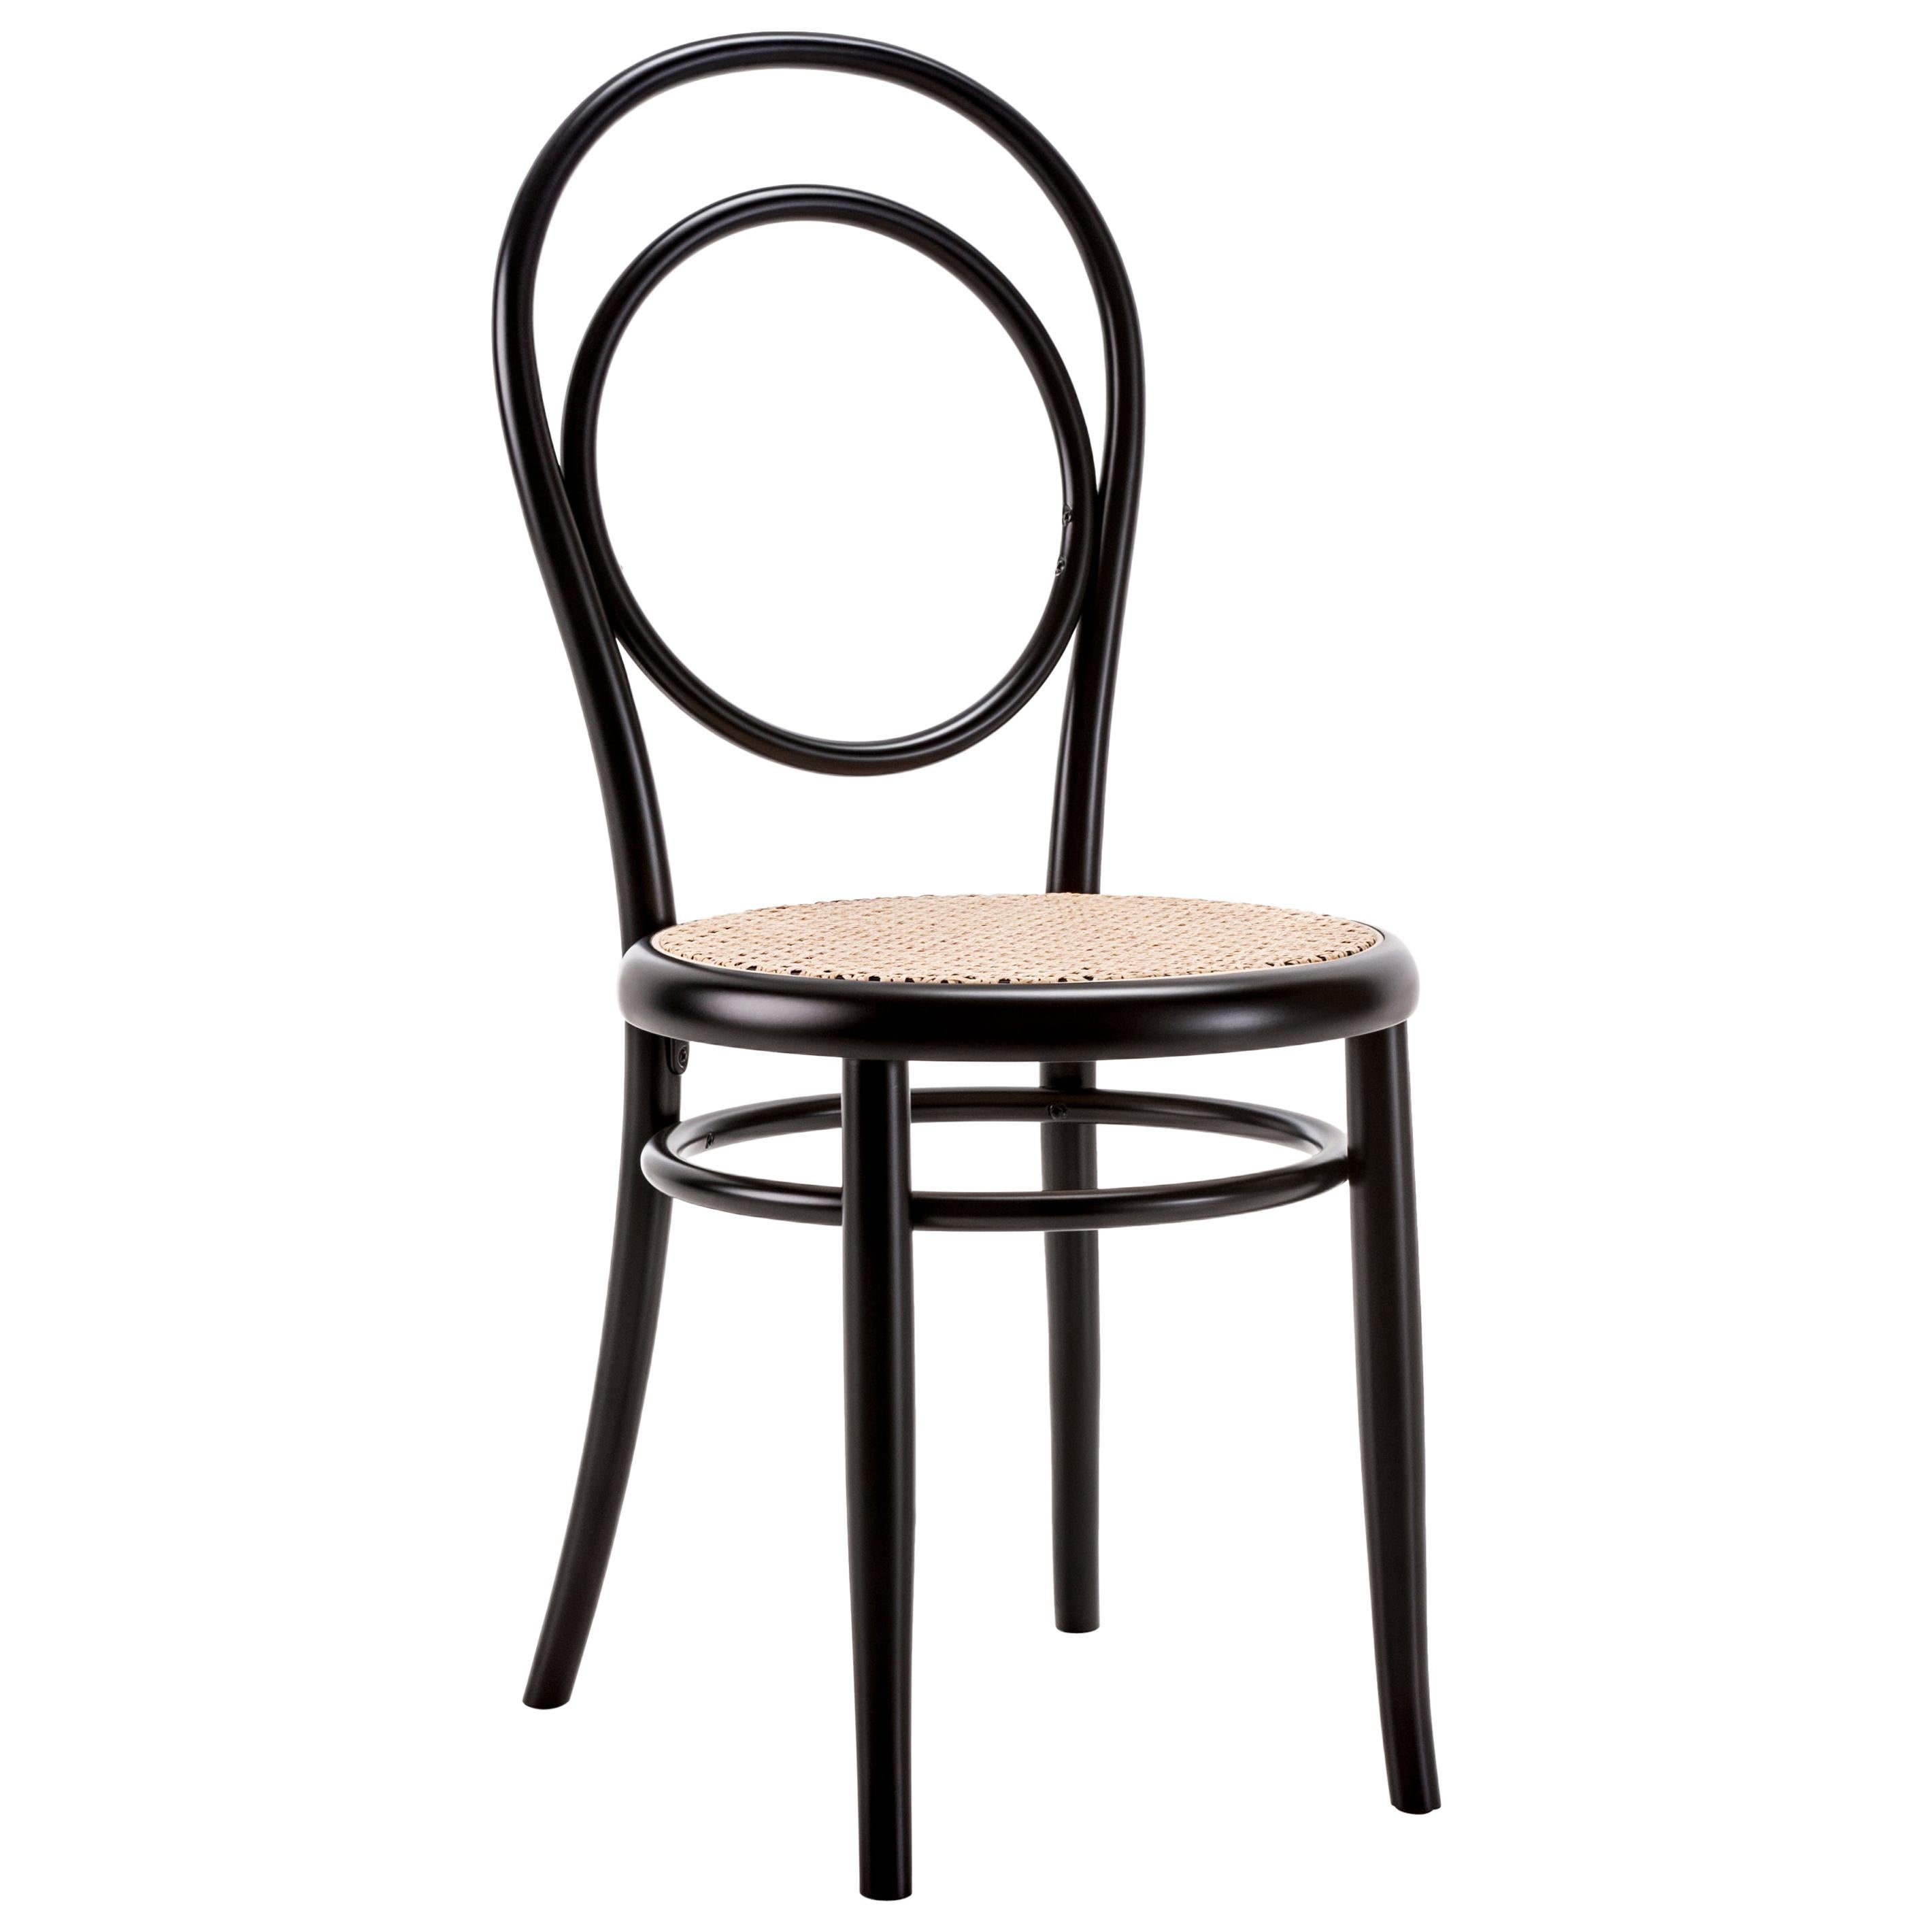 Gebrüder Thonet Vienna GmbH N.14 Perforated Chair in Black with Plywood Seat For Sale